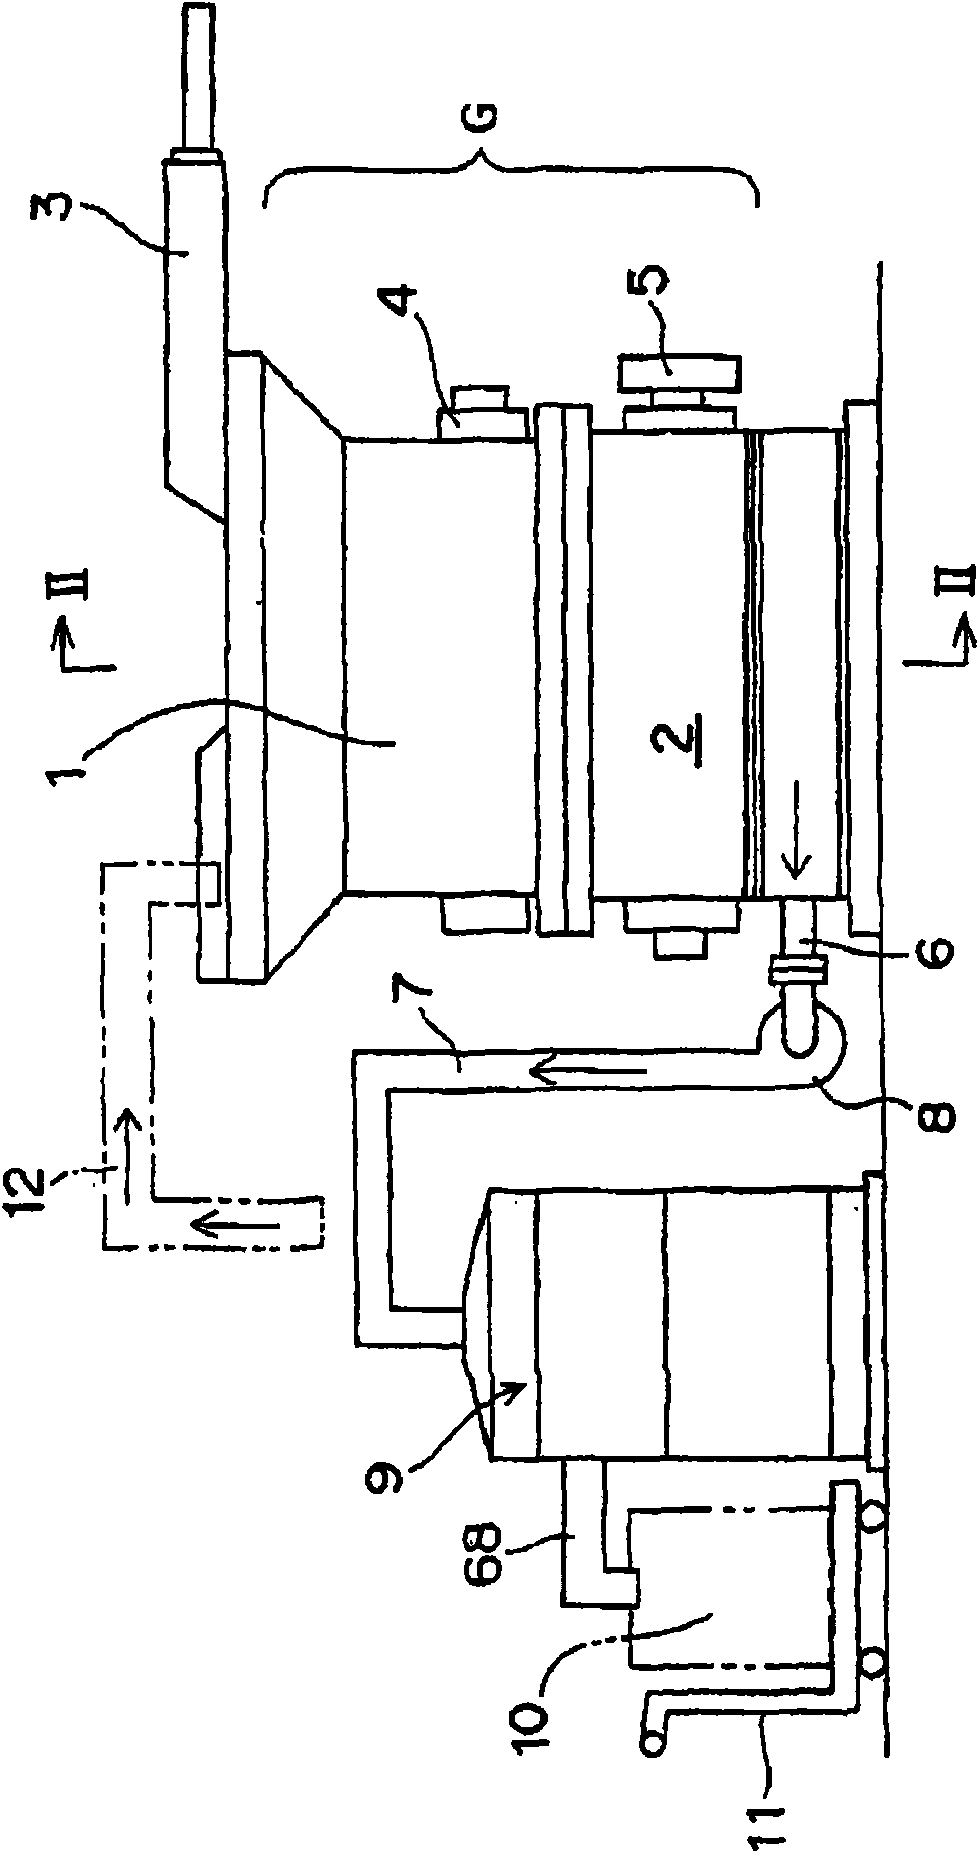 Flouring method for aluminum pot and powder manufacturing installation